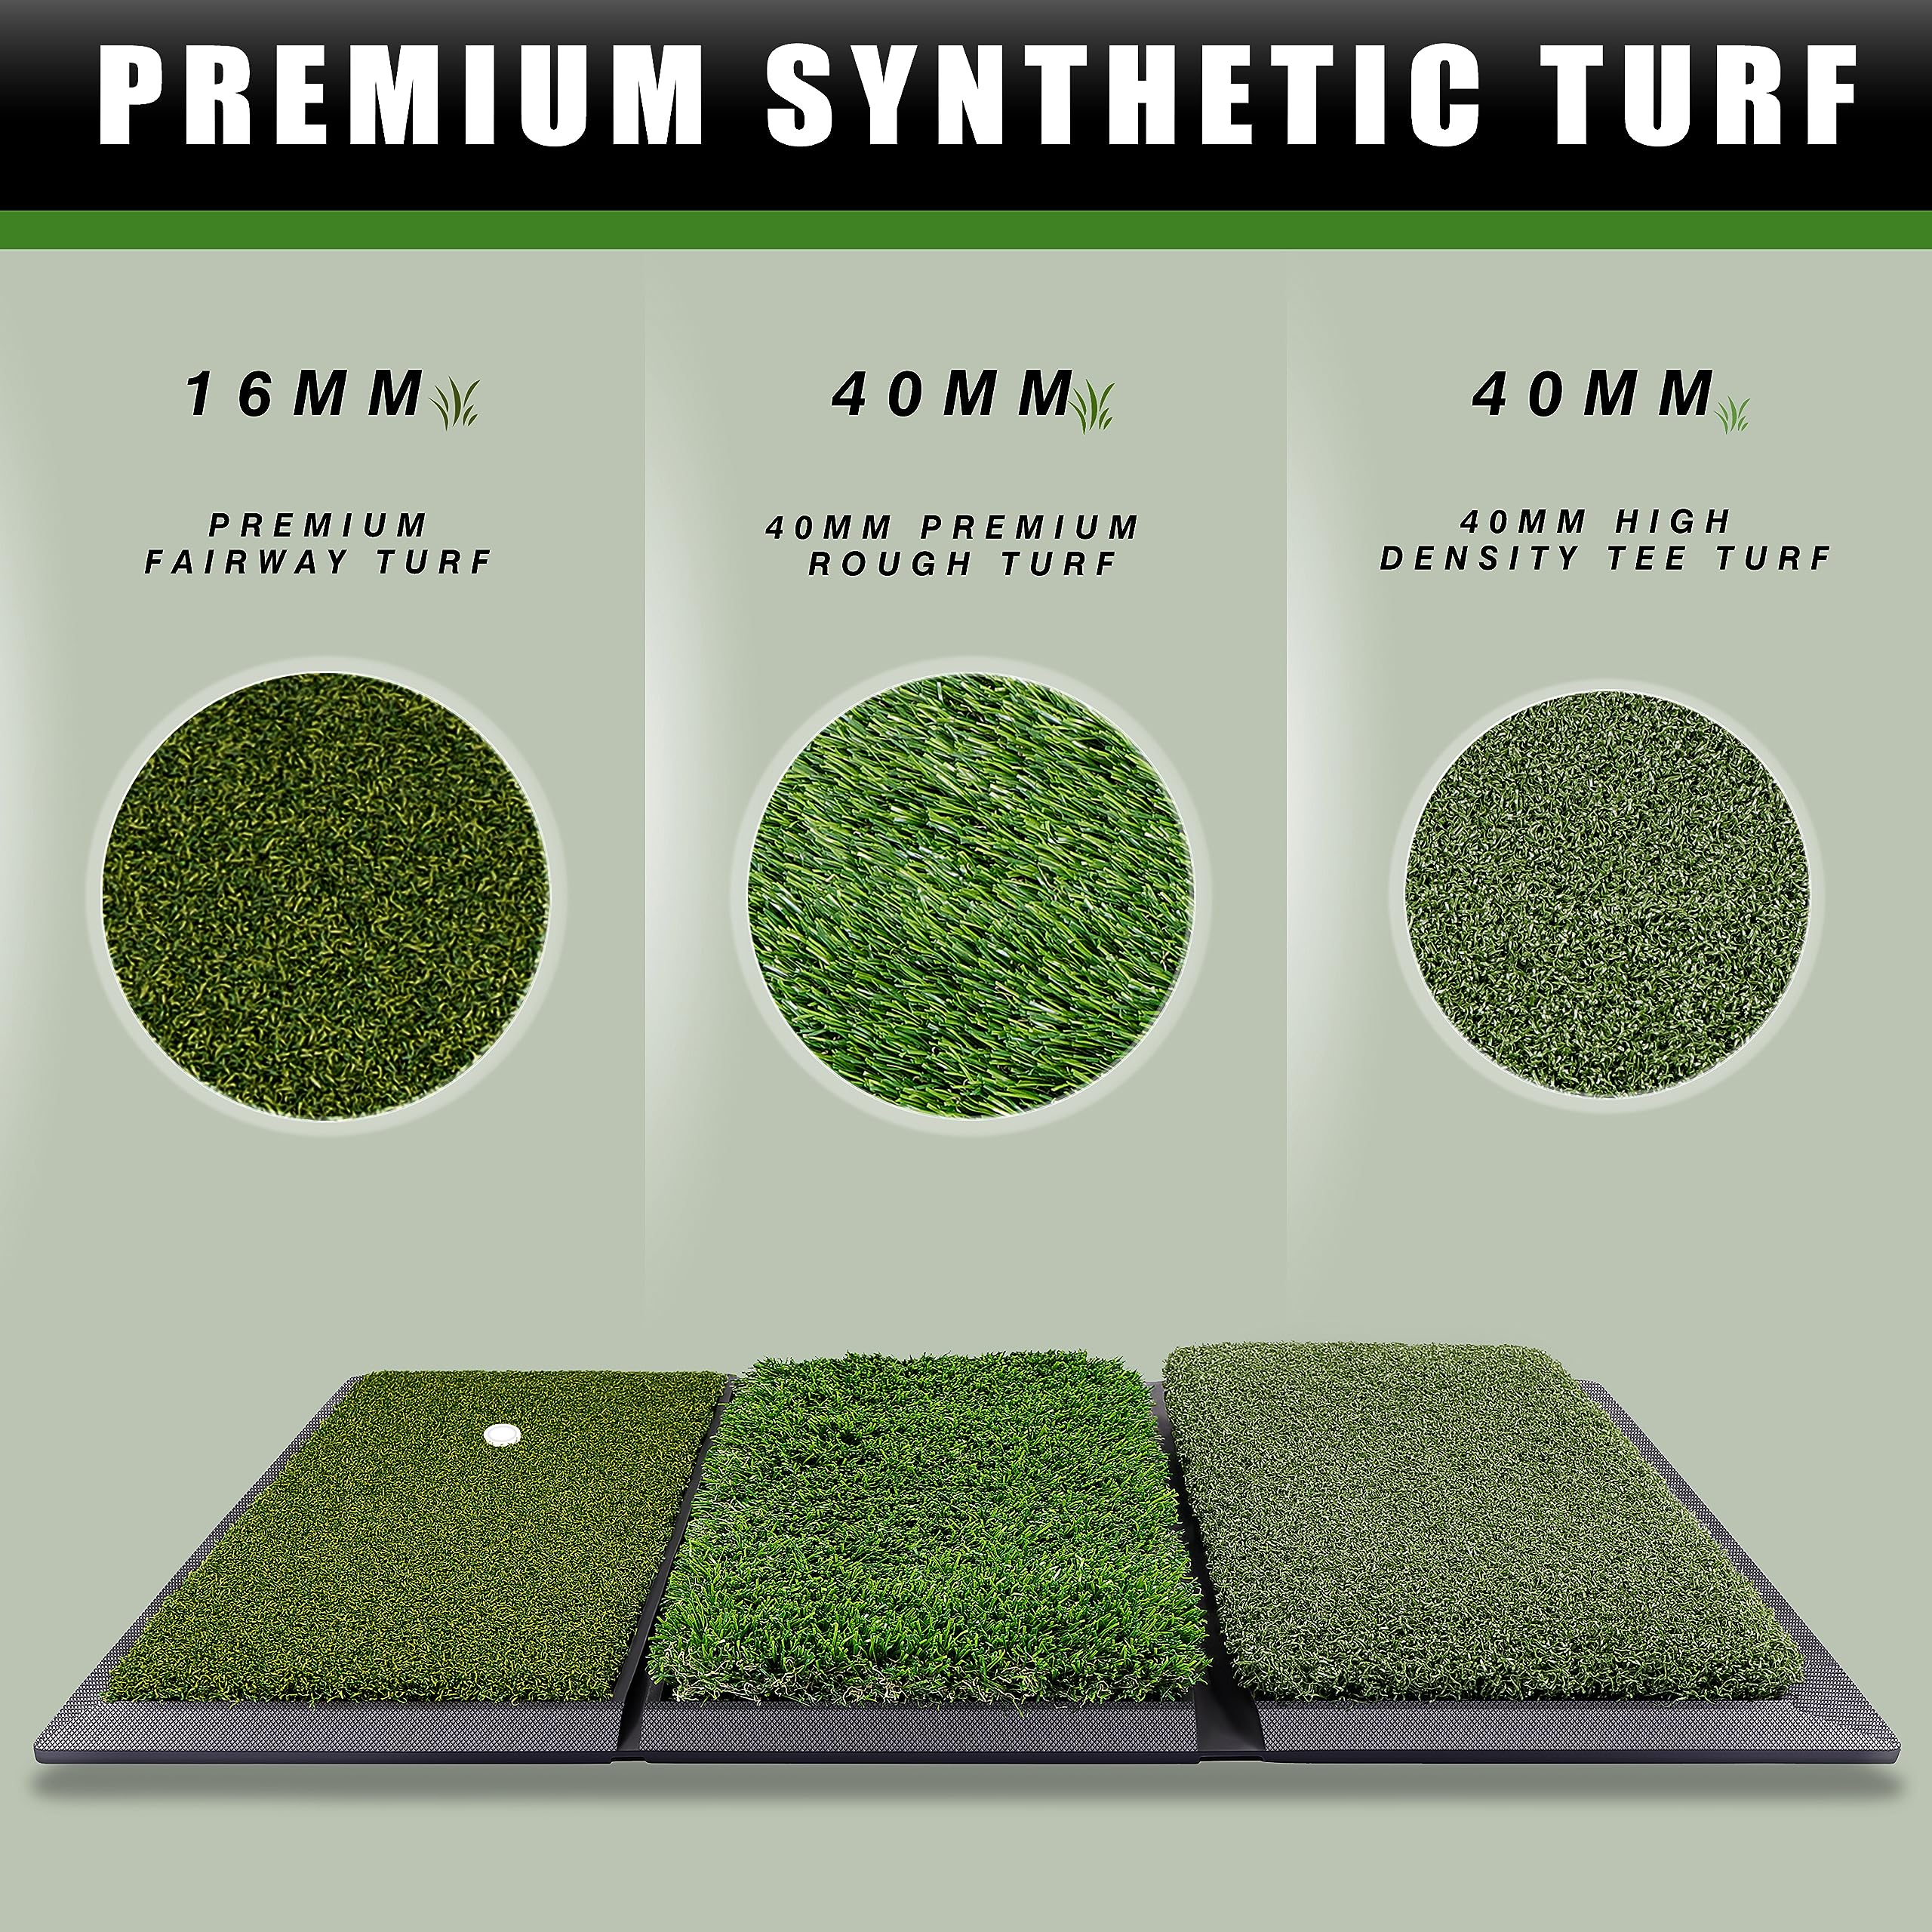 CHAMPKEY Professional Tri-Turf Golf Hitting Mat | Heavy Duty Rubber Backing Practice Mat Ideal for Indoor and Outdoor Training